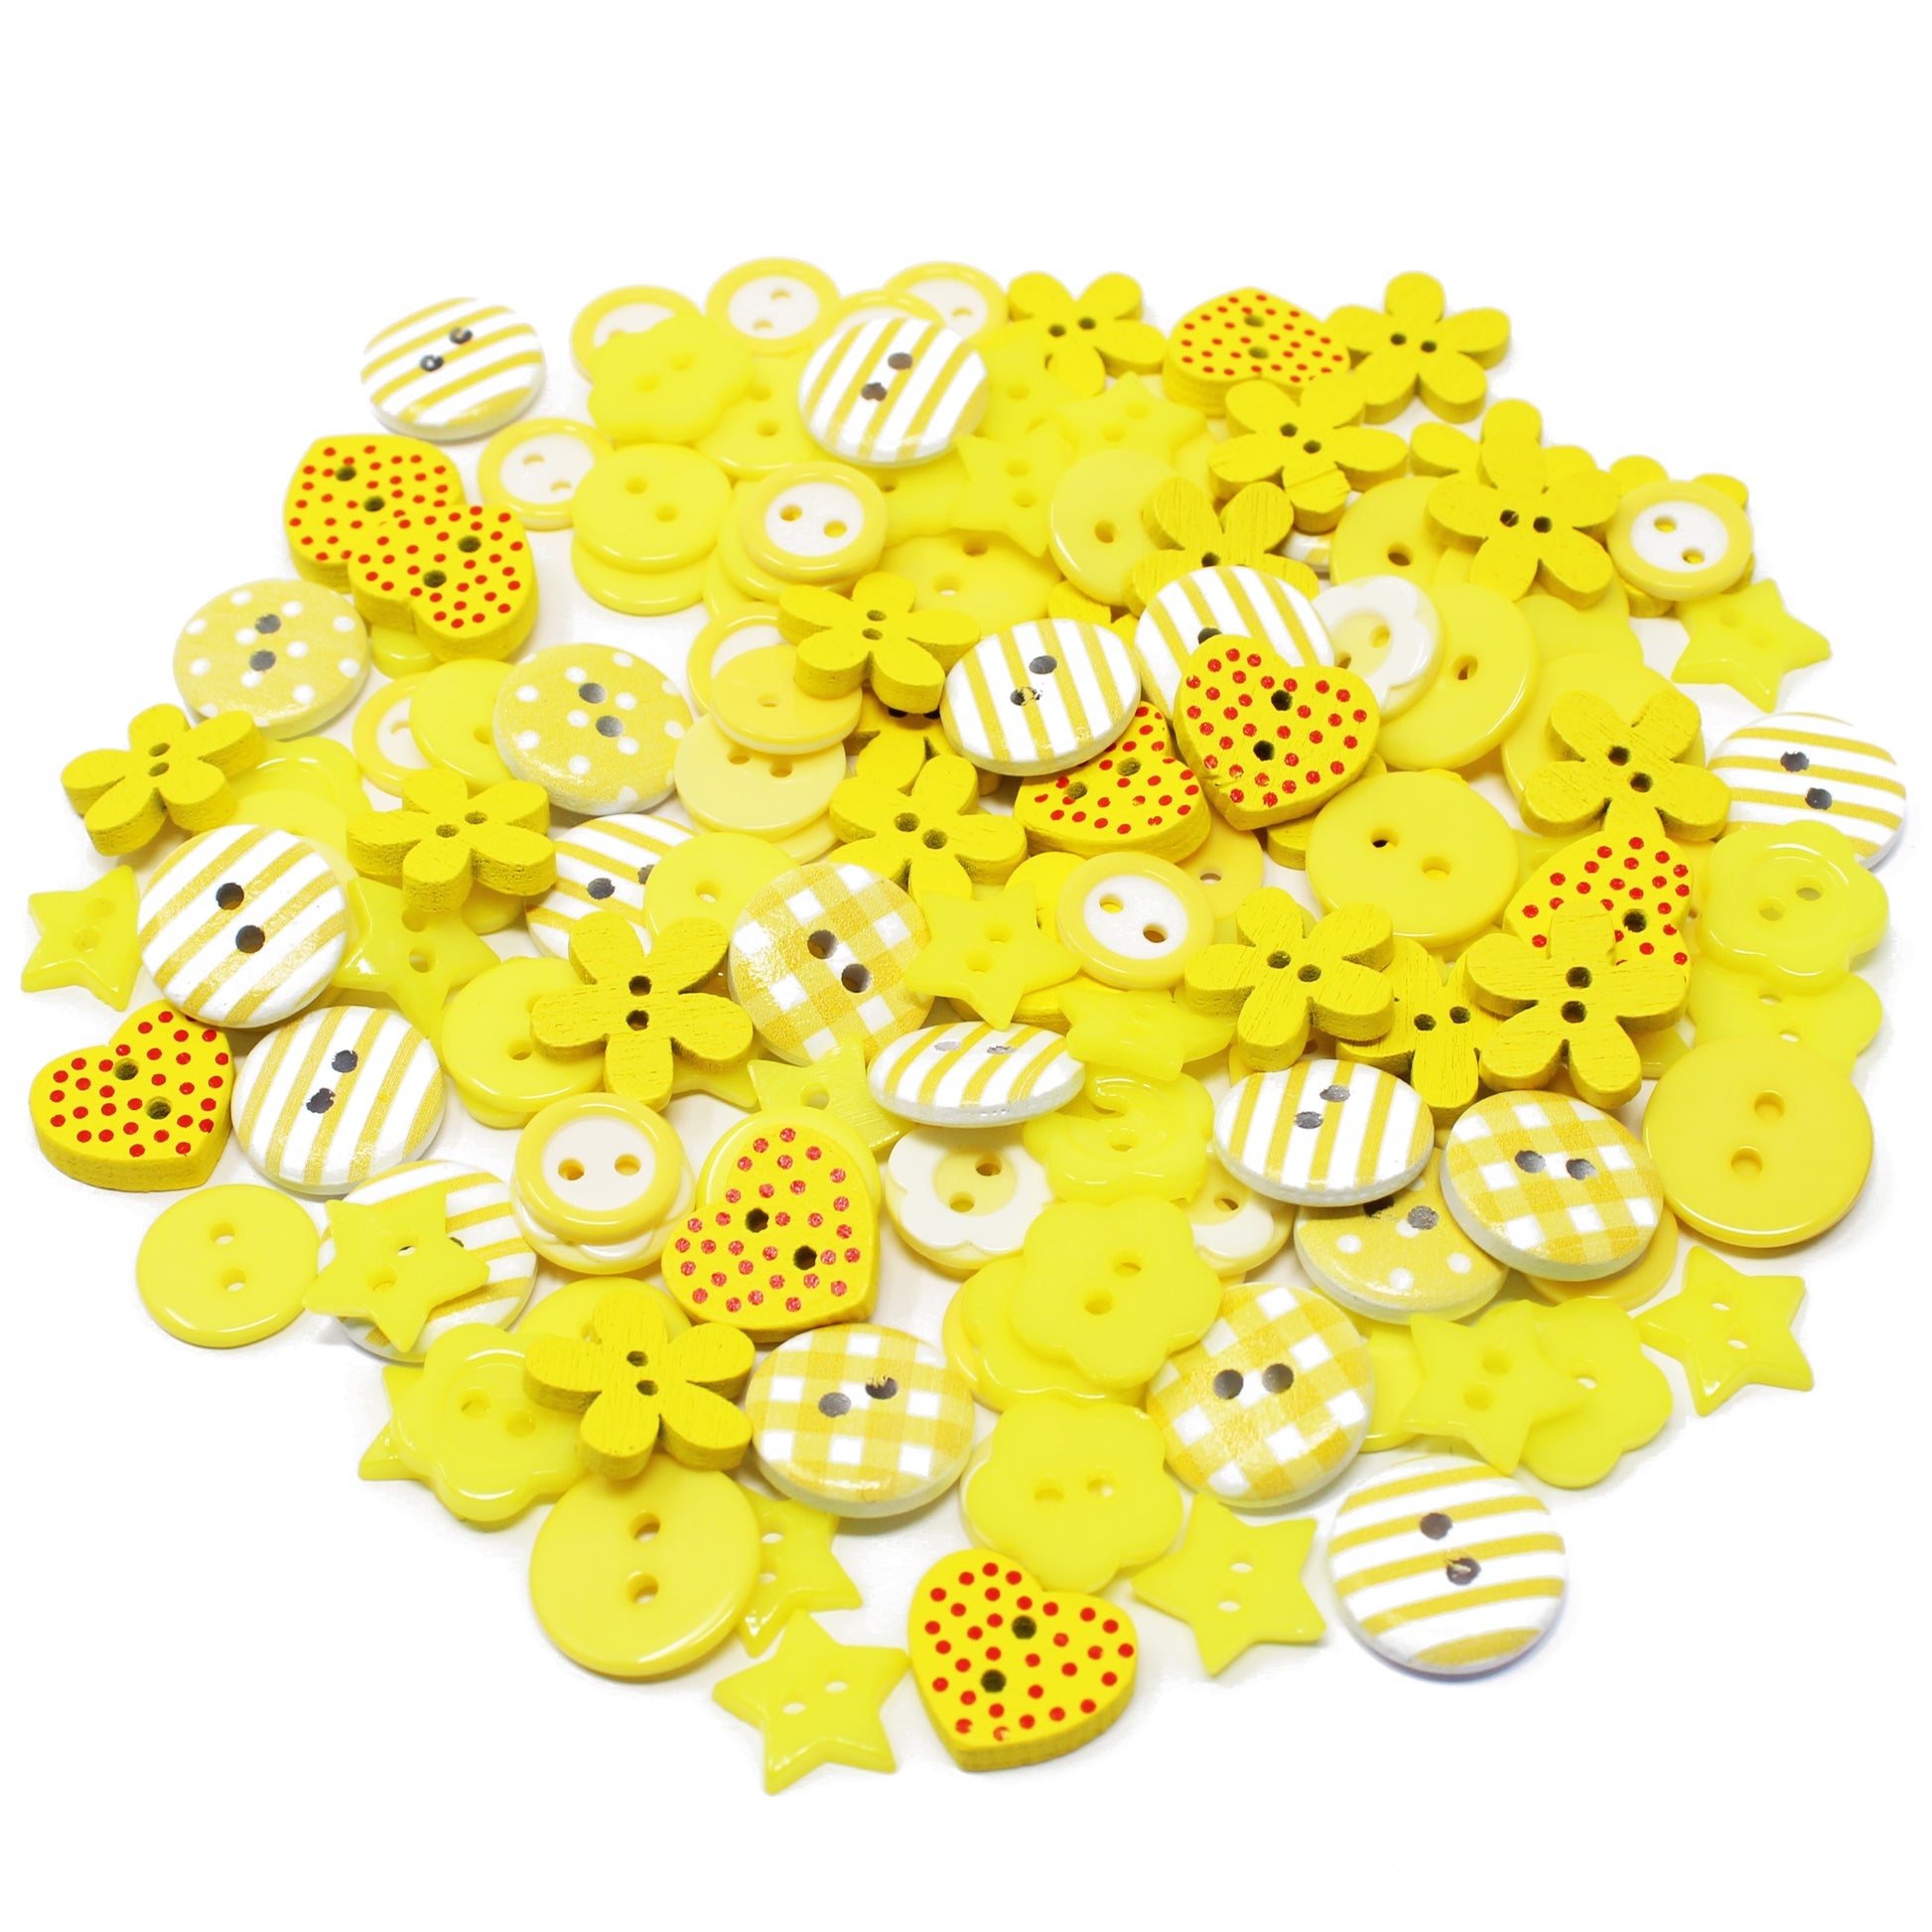 Yellow 150 Mix Wood Acrylic & Resin Buttons